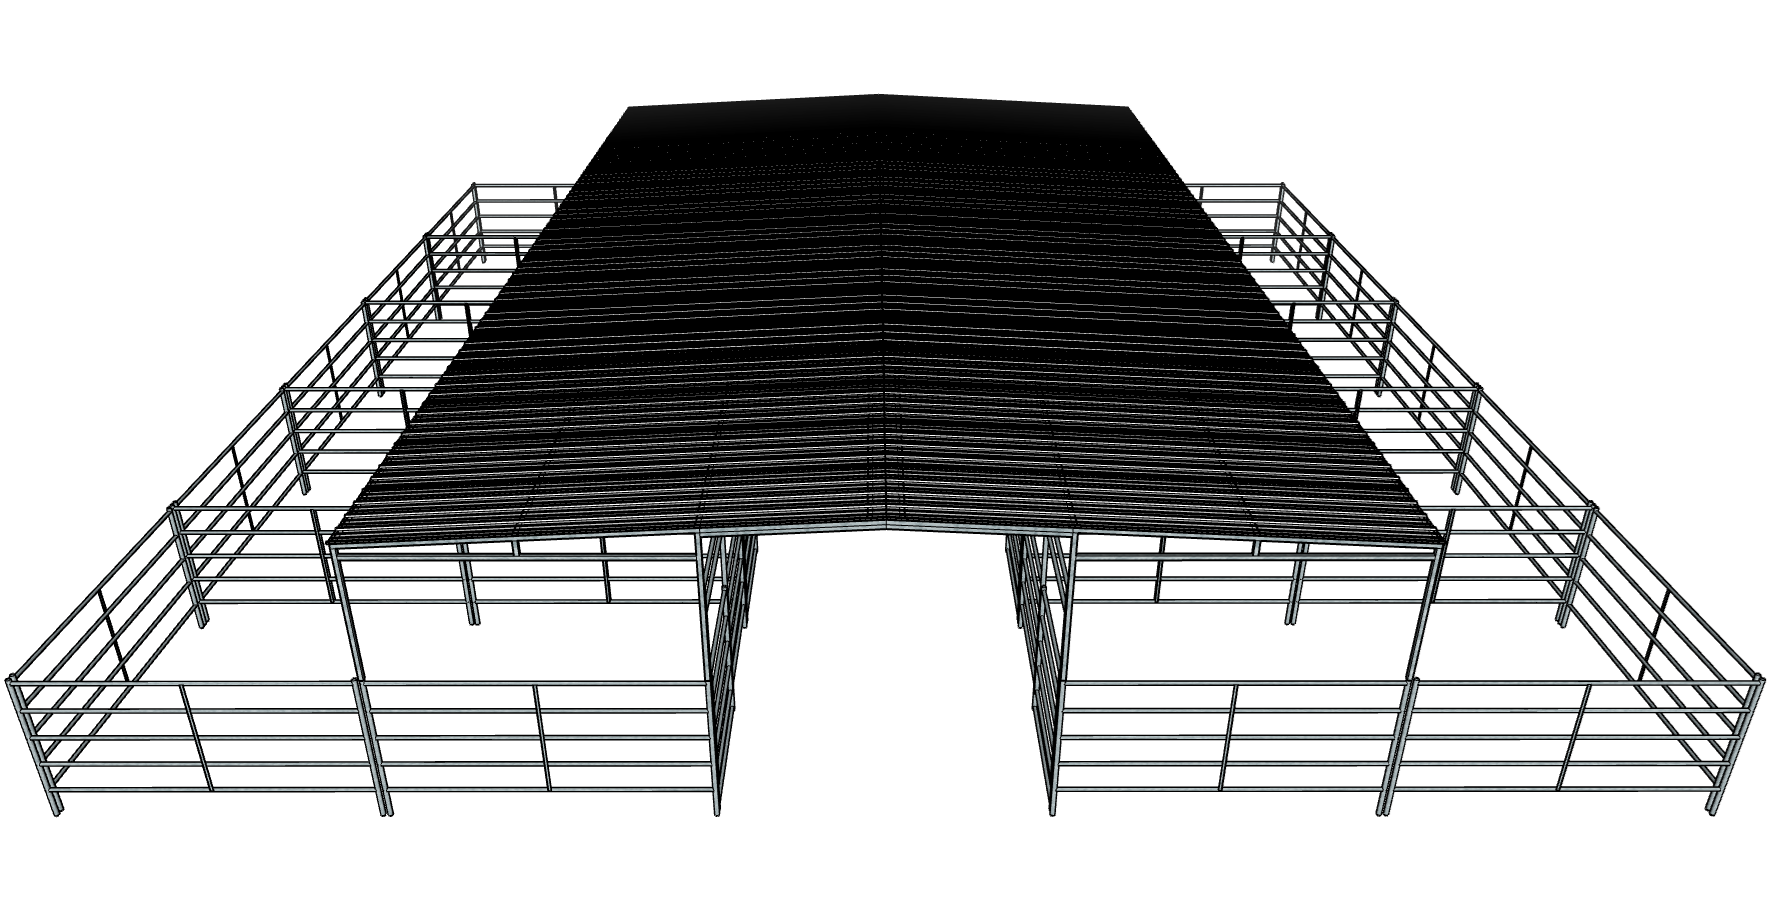 50 Ft X 50 Ft 5-Rail 10 Stall Barn Kit with 30 Ft by 50 Ft Gable Roof